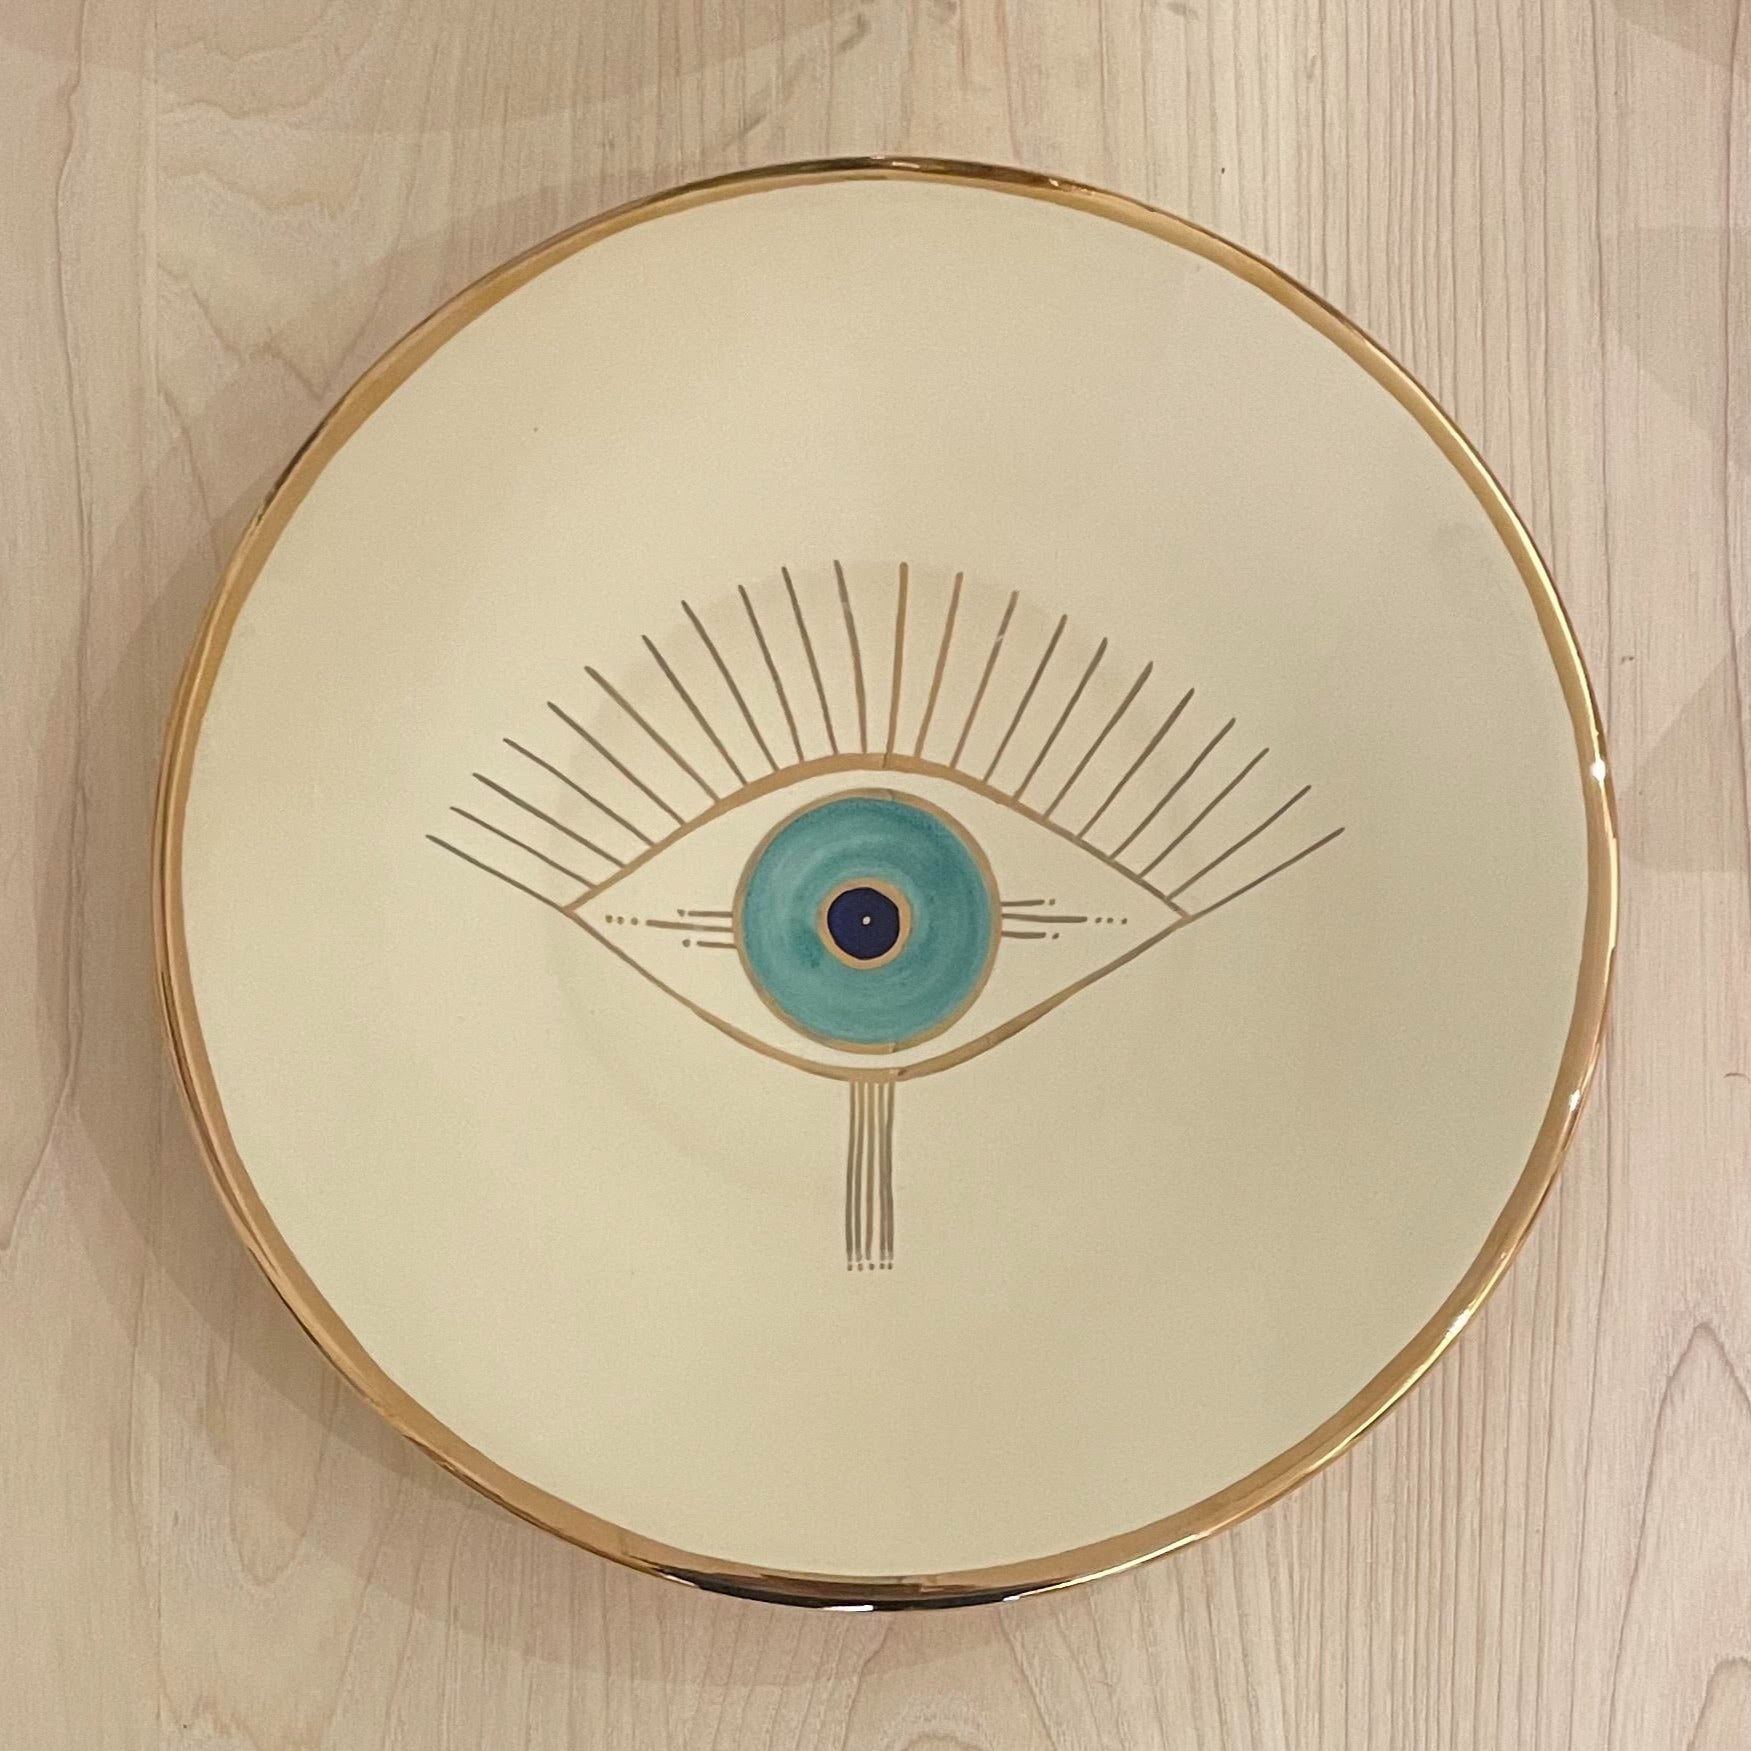 Beige ceramic plate with golden edge and eye design on the center.